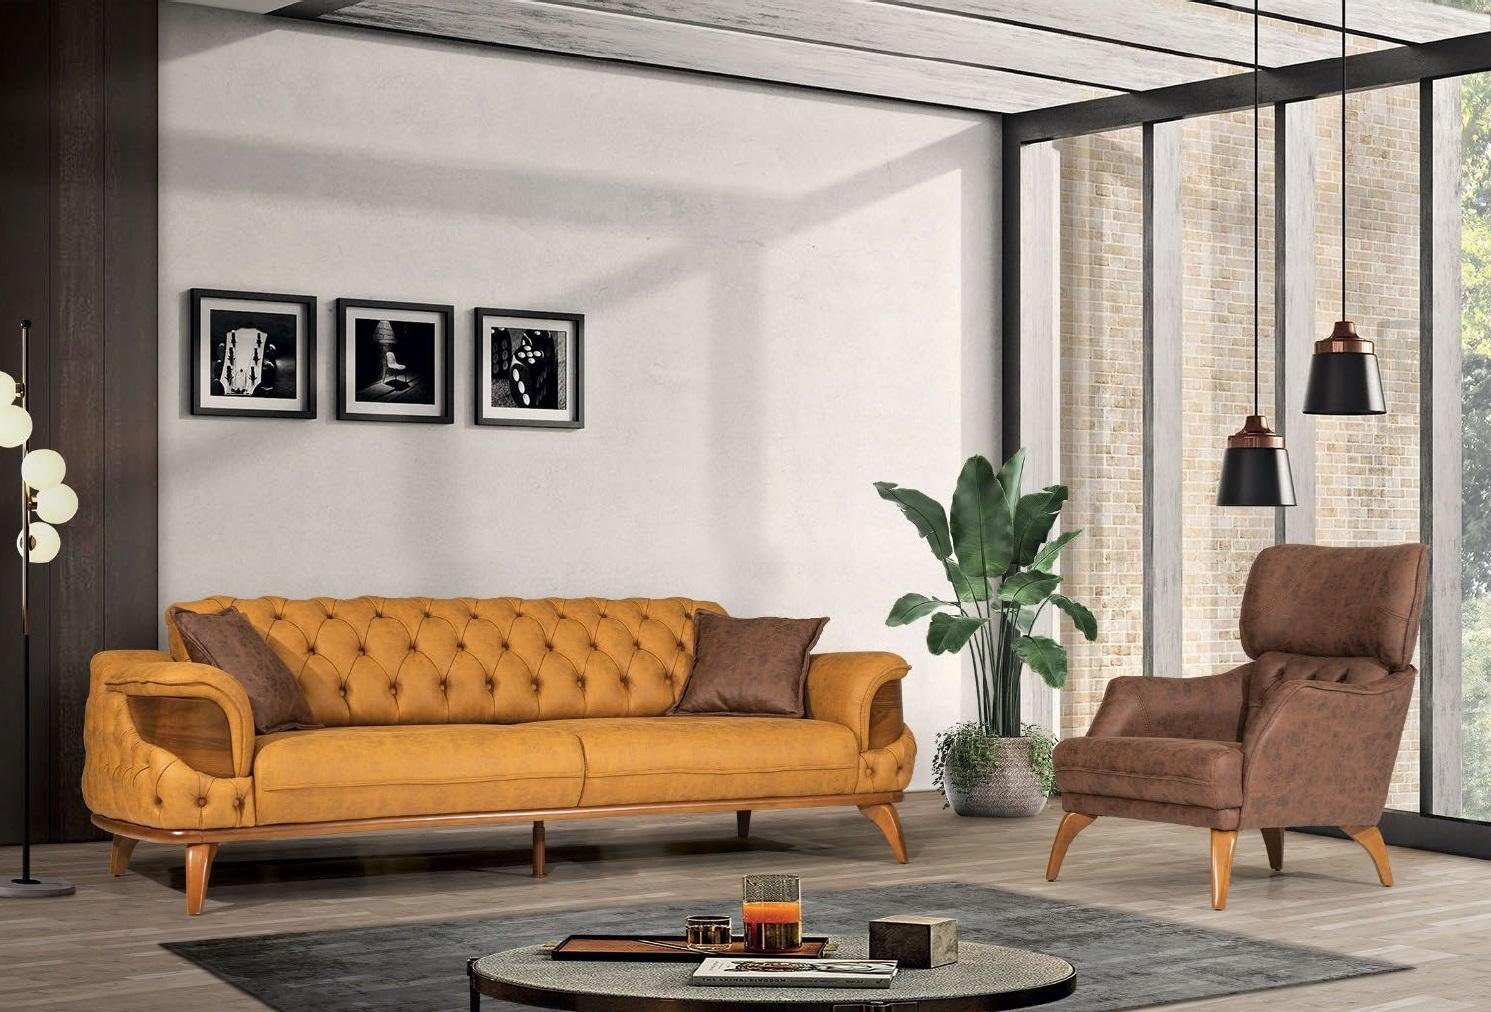 Luxus JVmoebel Sofas Europe Dreisitzer Made Western, Chesterfield in Leder Sofa Couches Couch Sofa